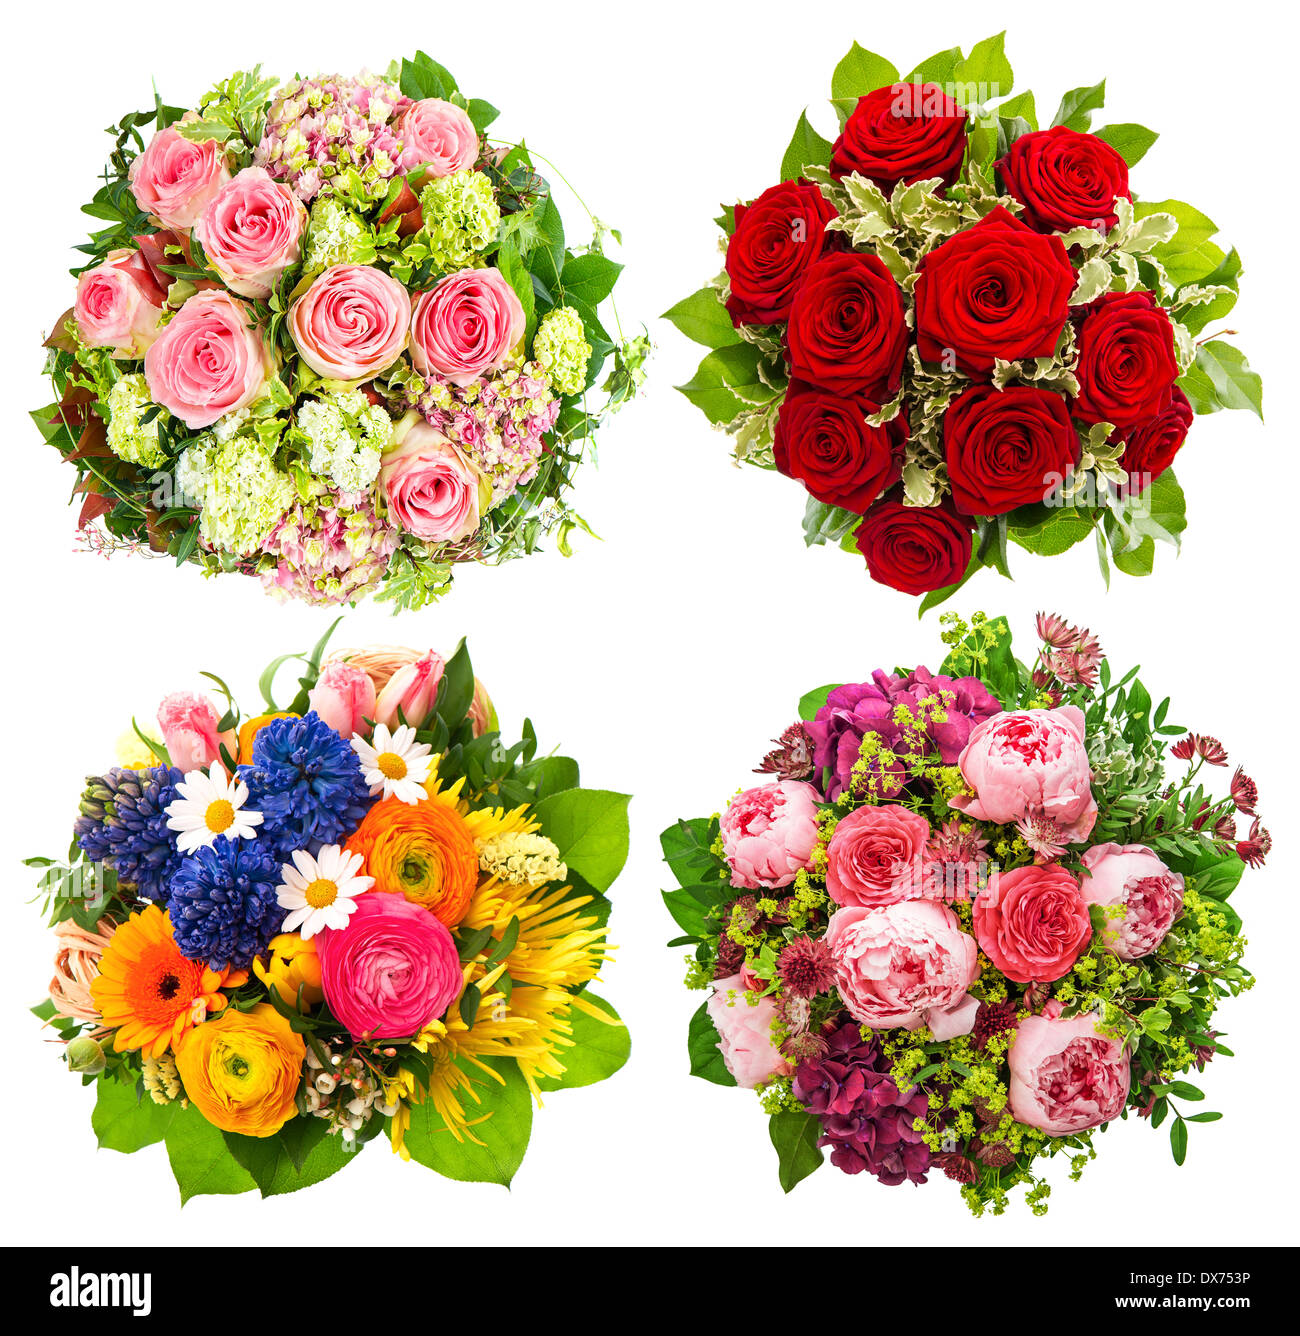 four colorful flowers bouquet for Birthday, Wedding, Mothers Day, Easter, Holidays and Life Events Stock Photo